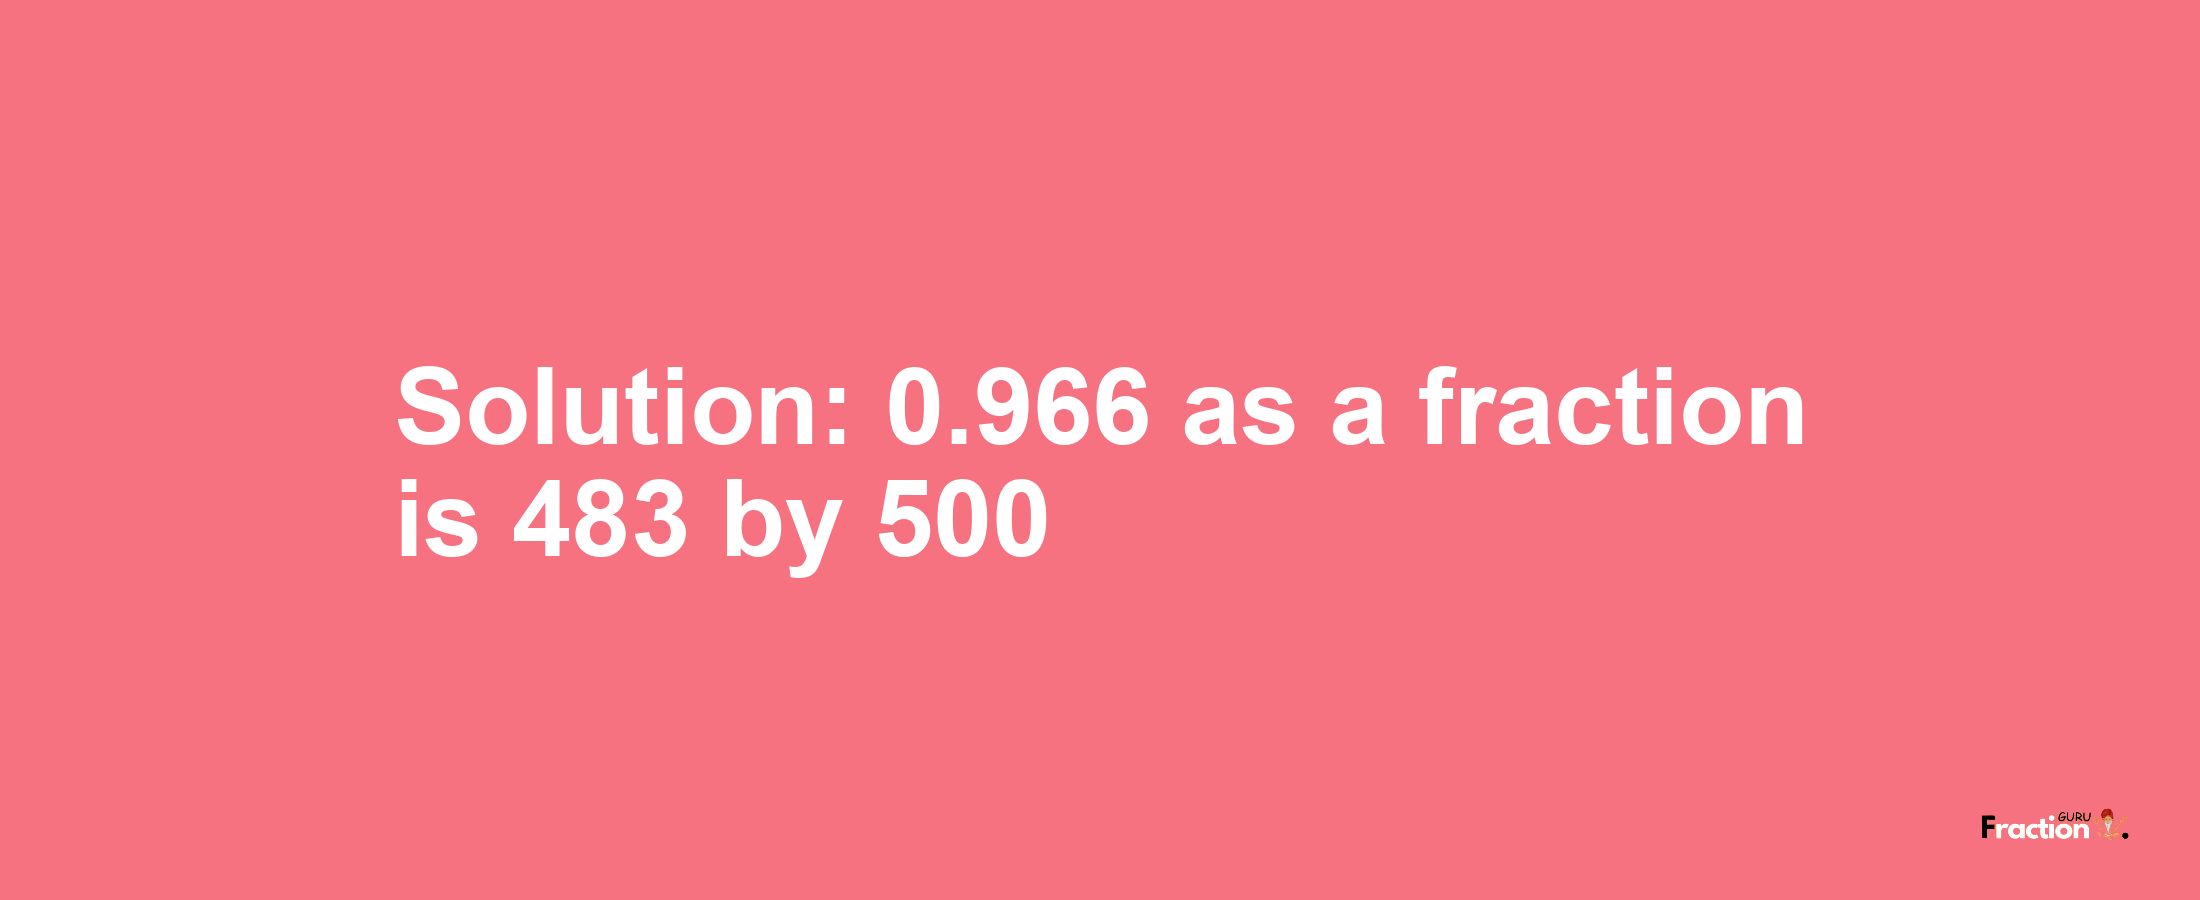 Solution:0.966 as a fraction is 483/500